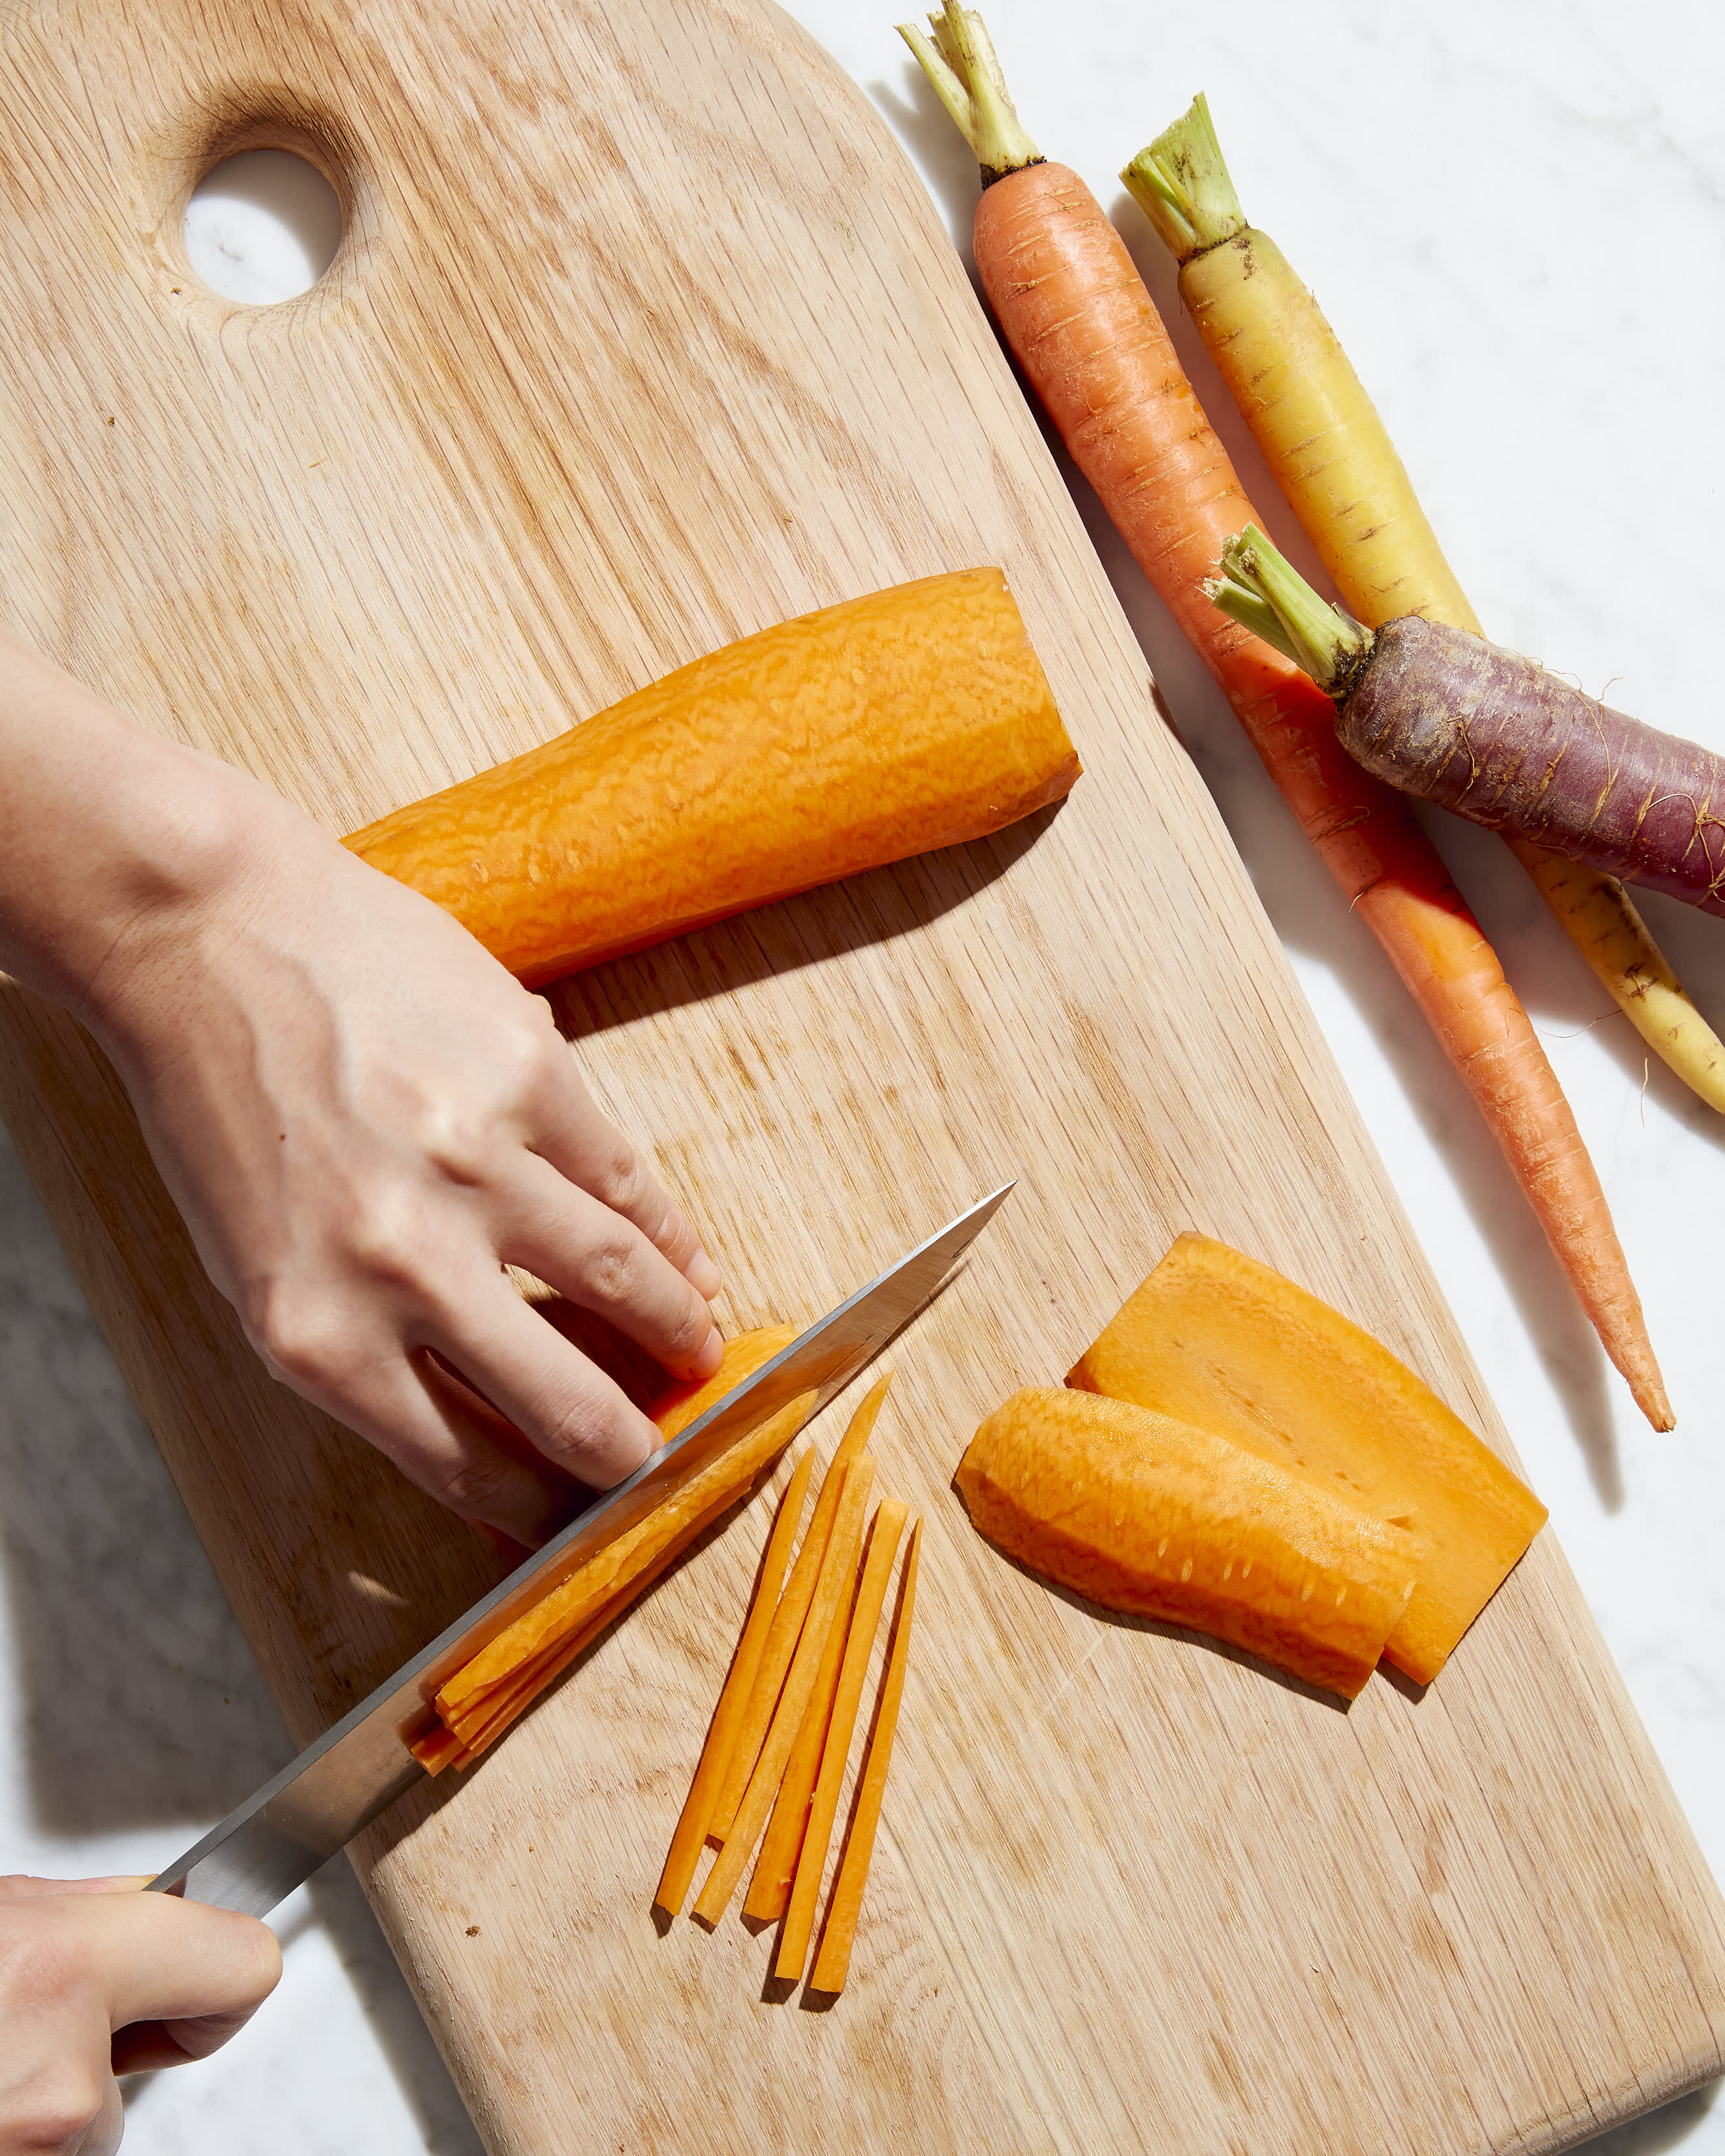 https://cdn.apartmenttherapy.info/image/upload/v1660582274/k/Photo/Series/2022-09-how-to-cut-carrots/How-to-Cut-Carrots-155.jpg